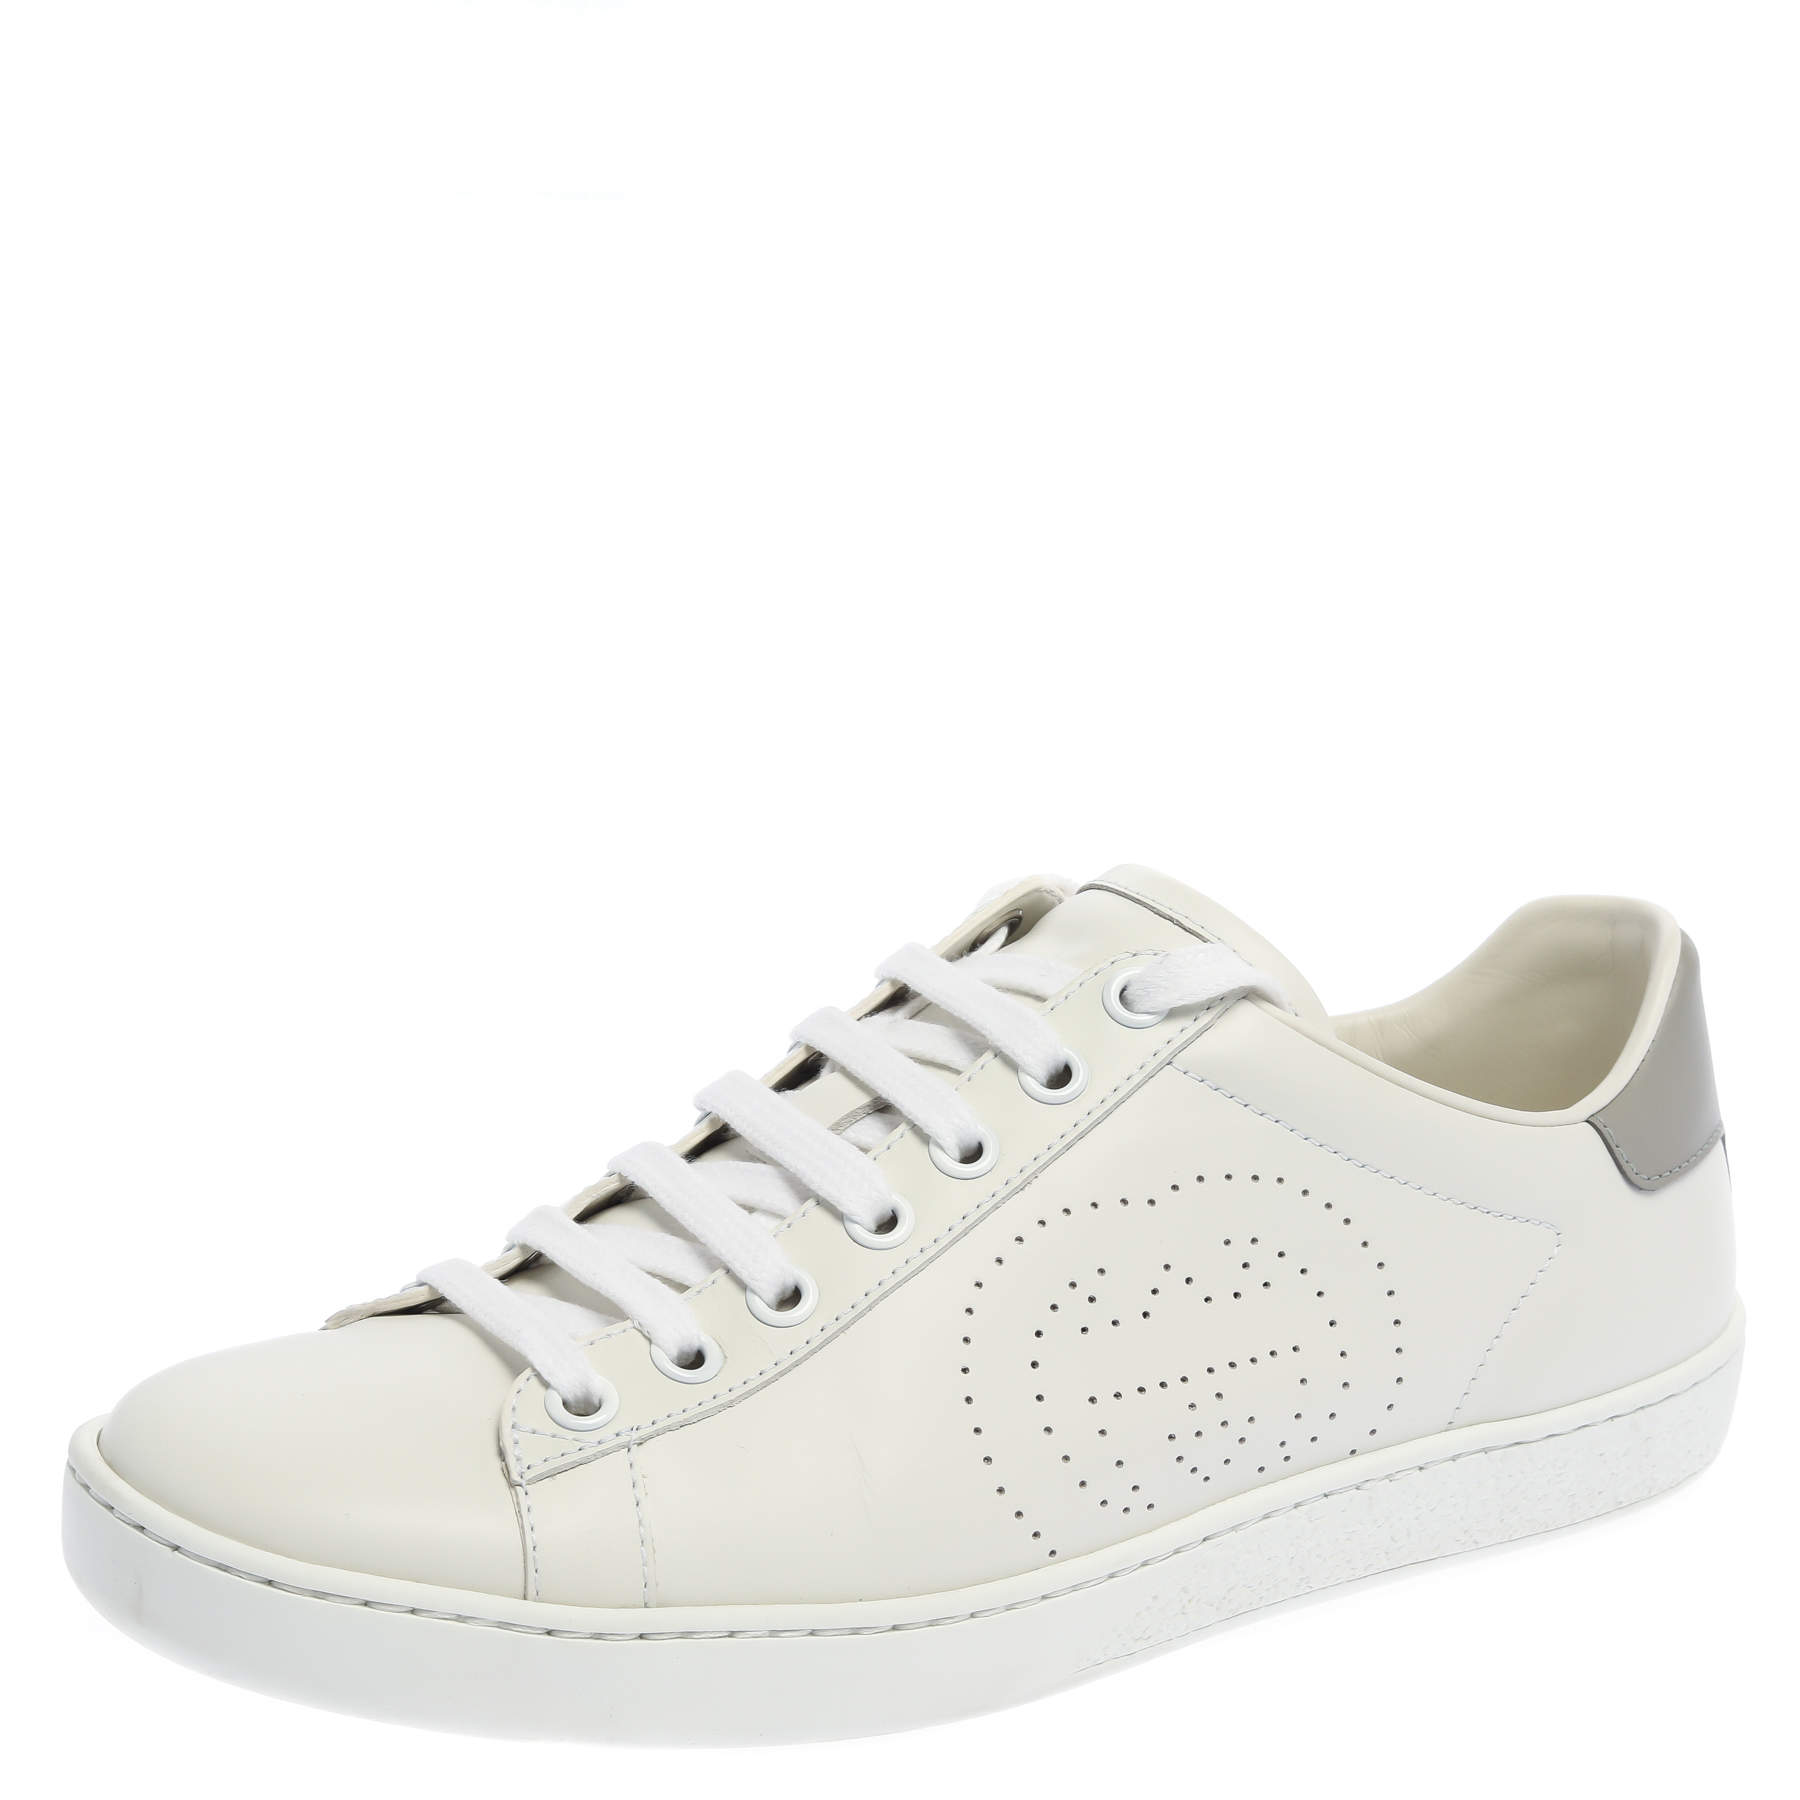 Gucci White/Grey Perforated Interlocking G Leather Ace Sneakers Size 37